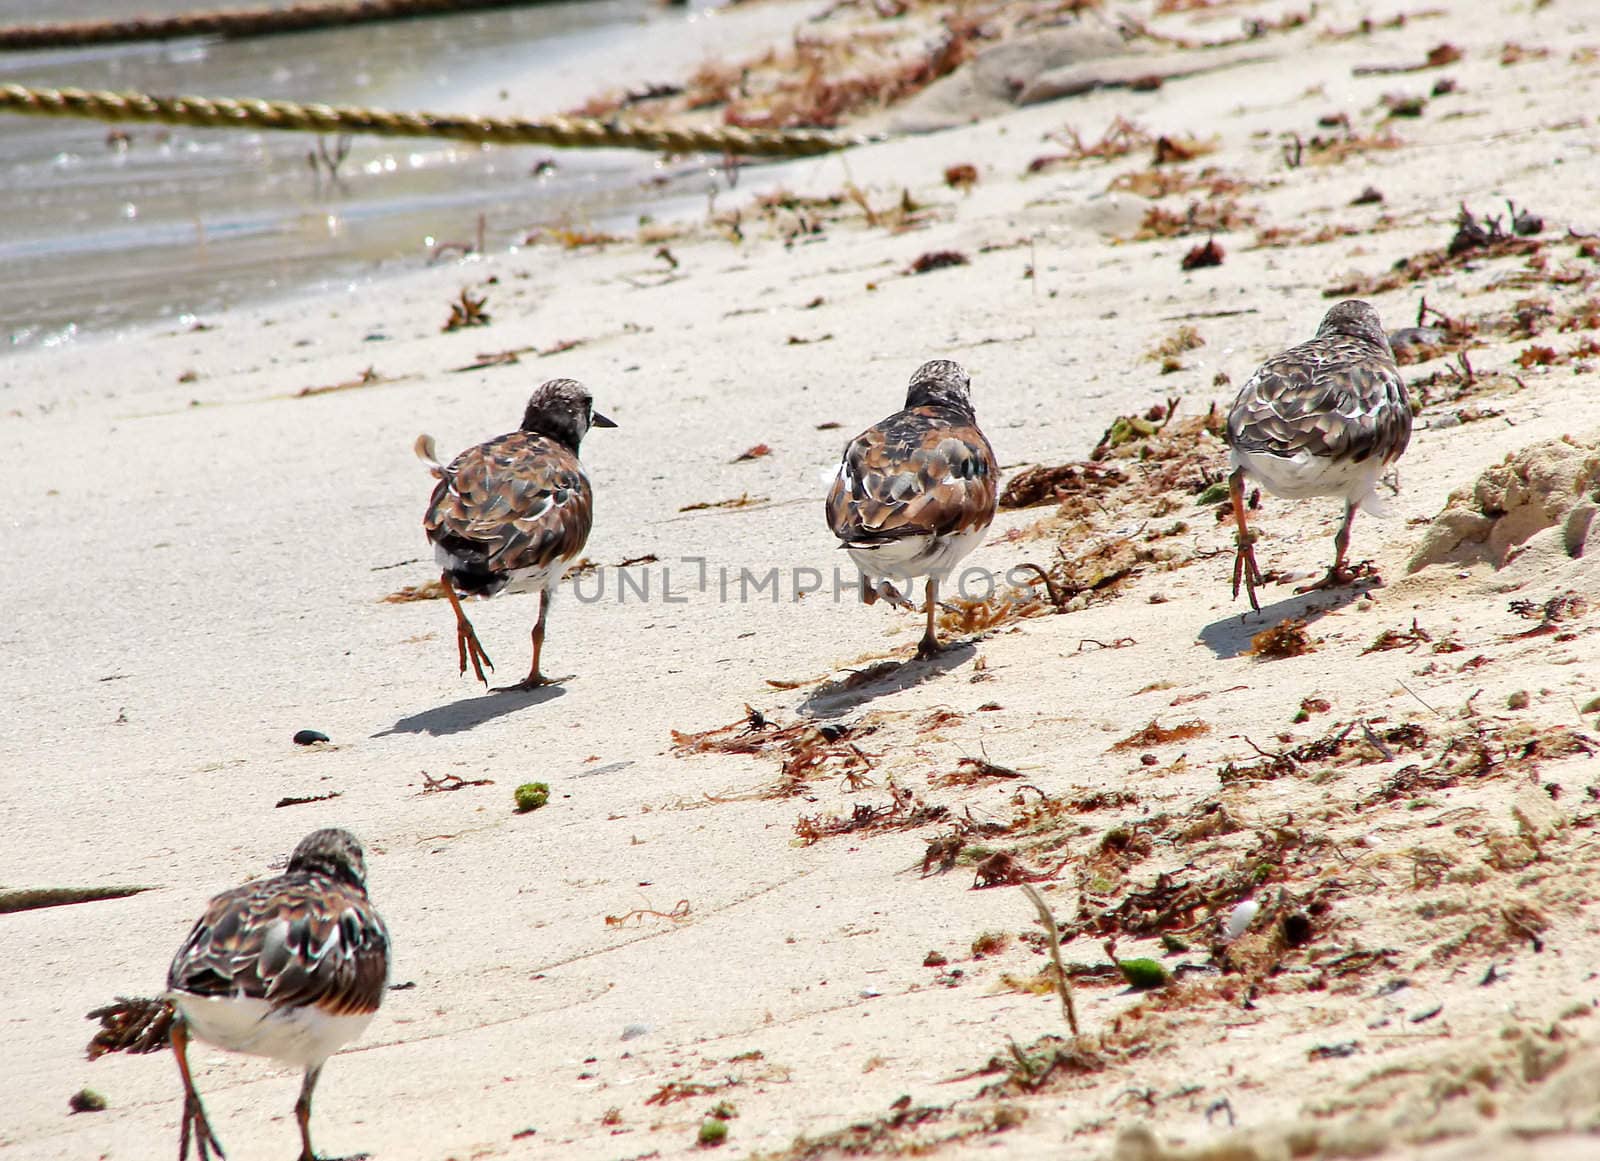 Concept of being left being by a group, not fitting in: Ruddy turnstone trying to catch up with three other birds on the beach.                          